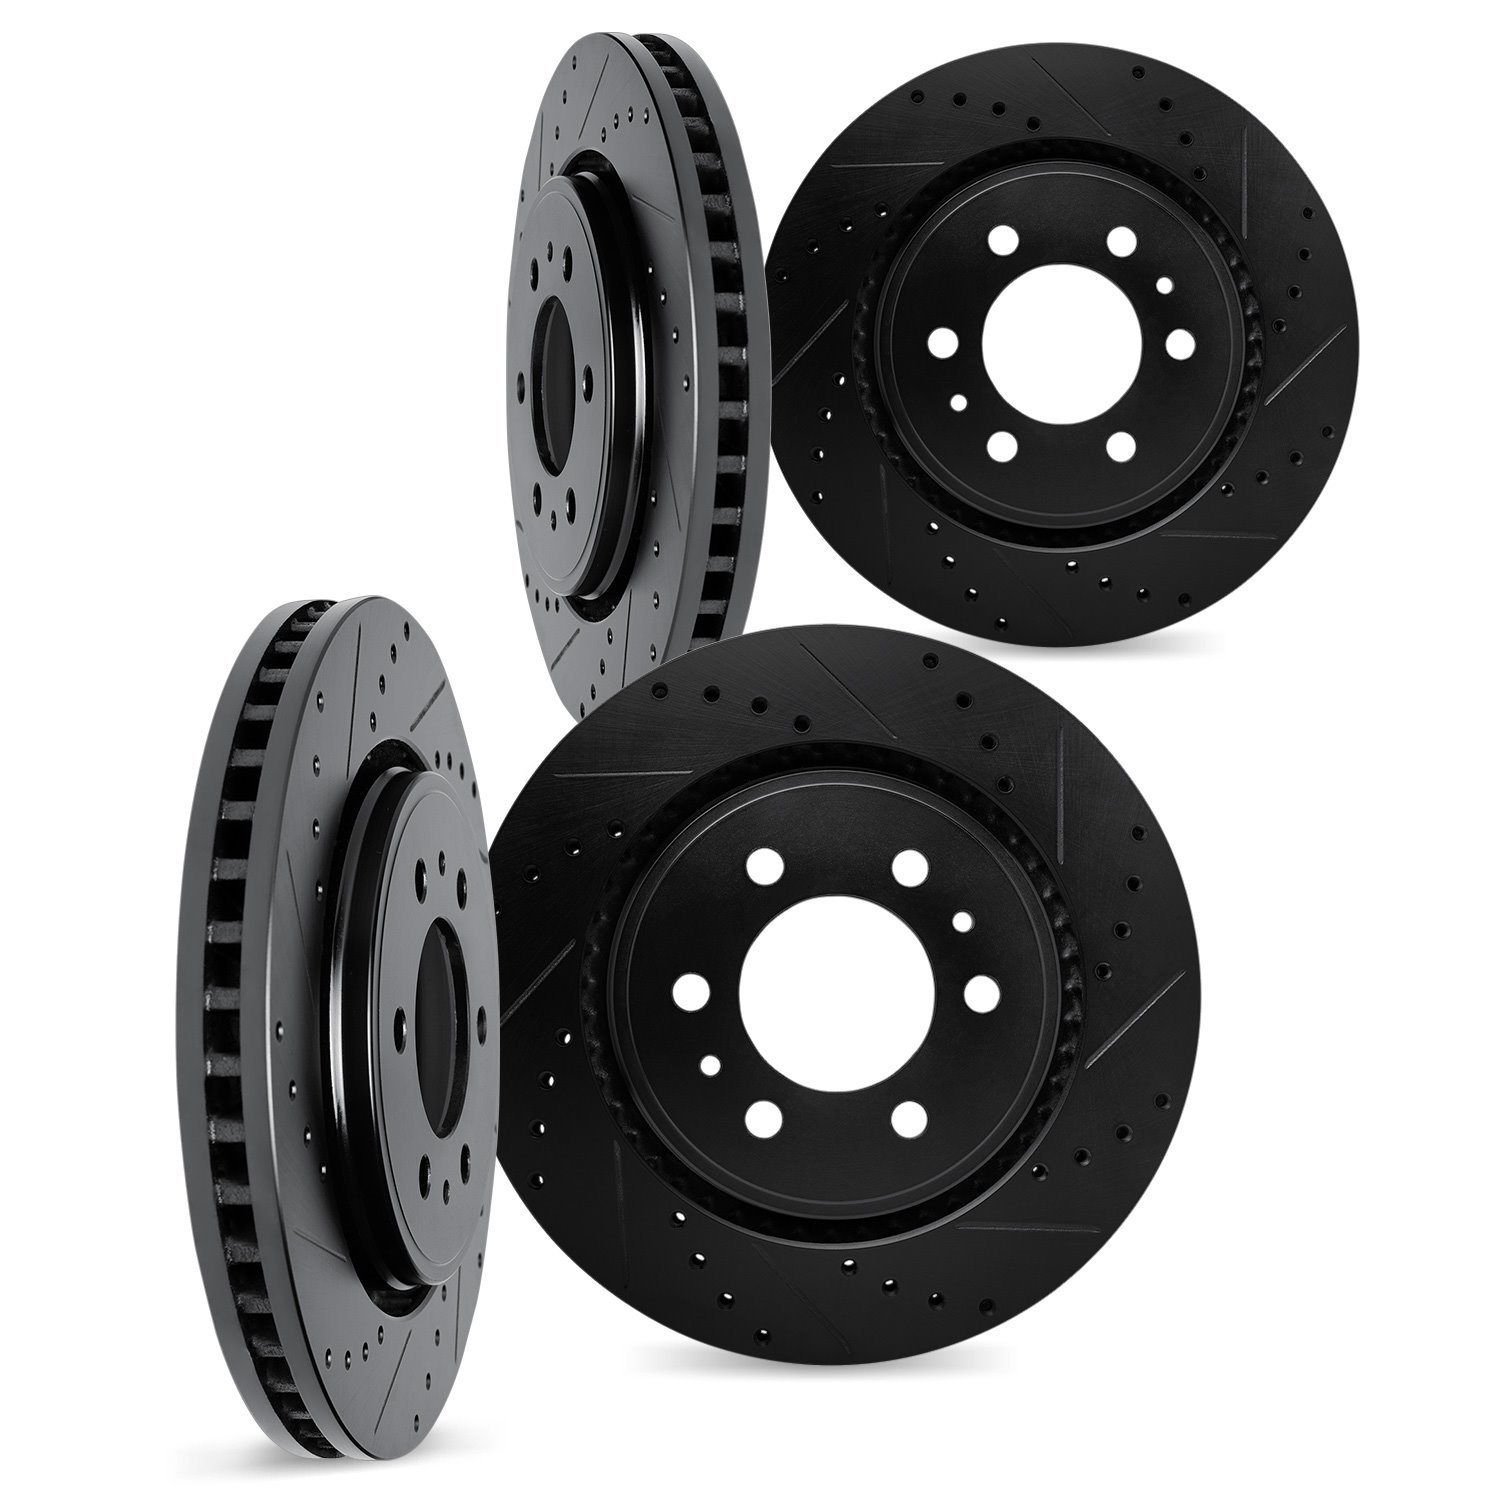 8004-92037 Drilled/Slotted Brake Rotors [Black], 2015-2017 Mitsubishi, Position: Front and Rear